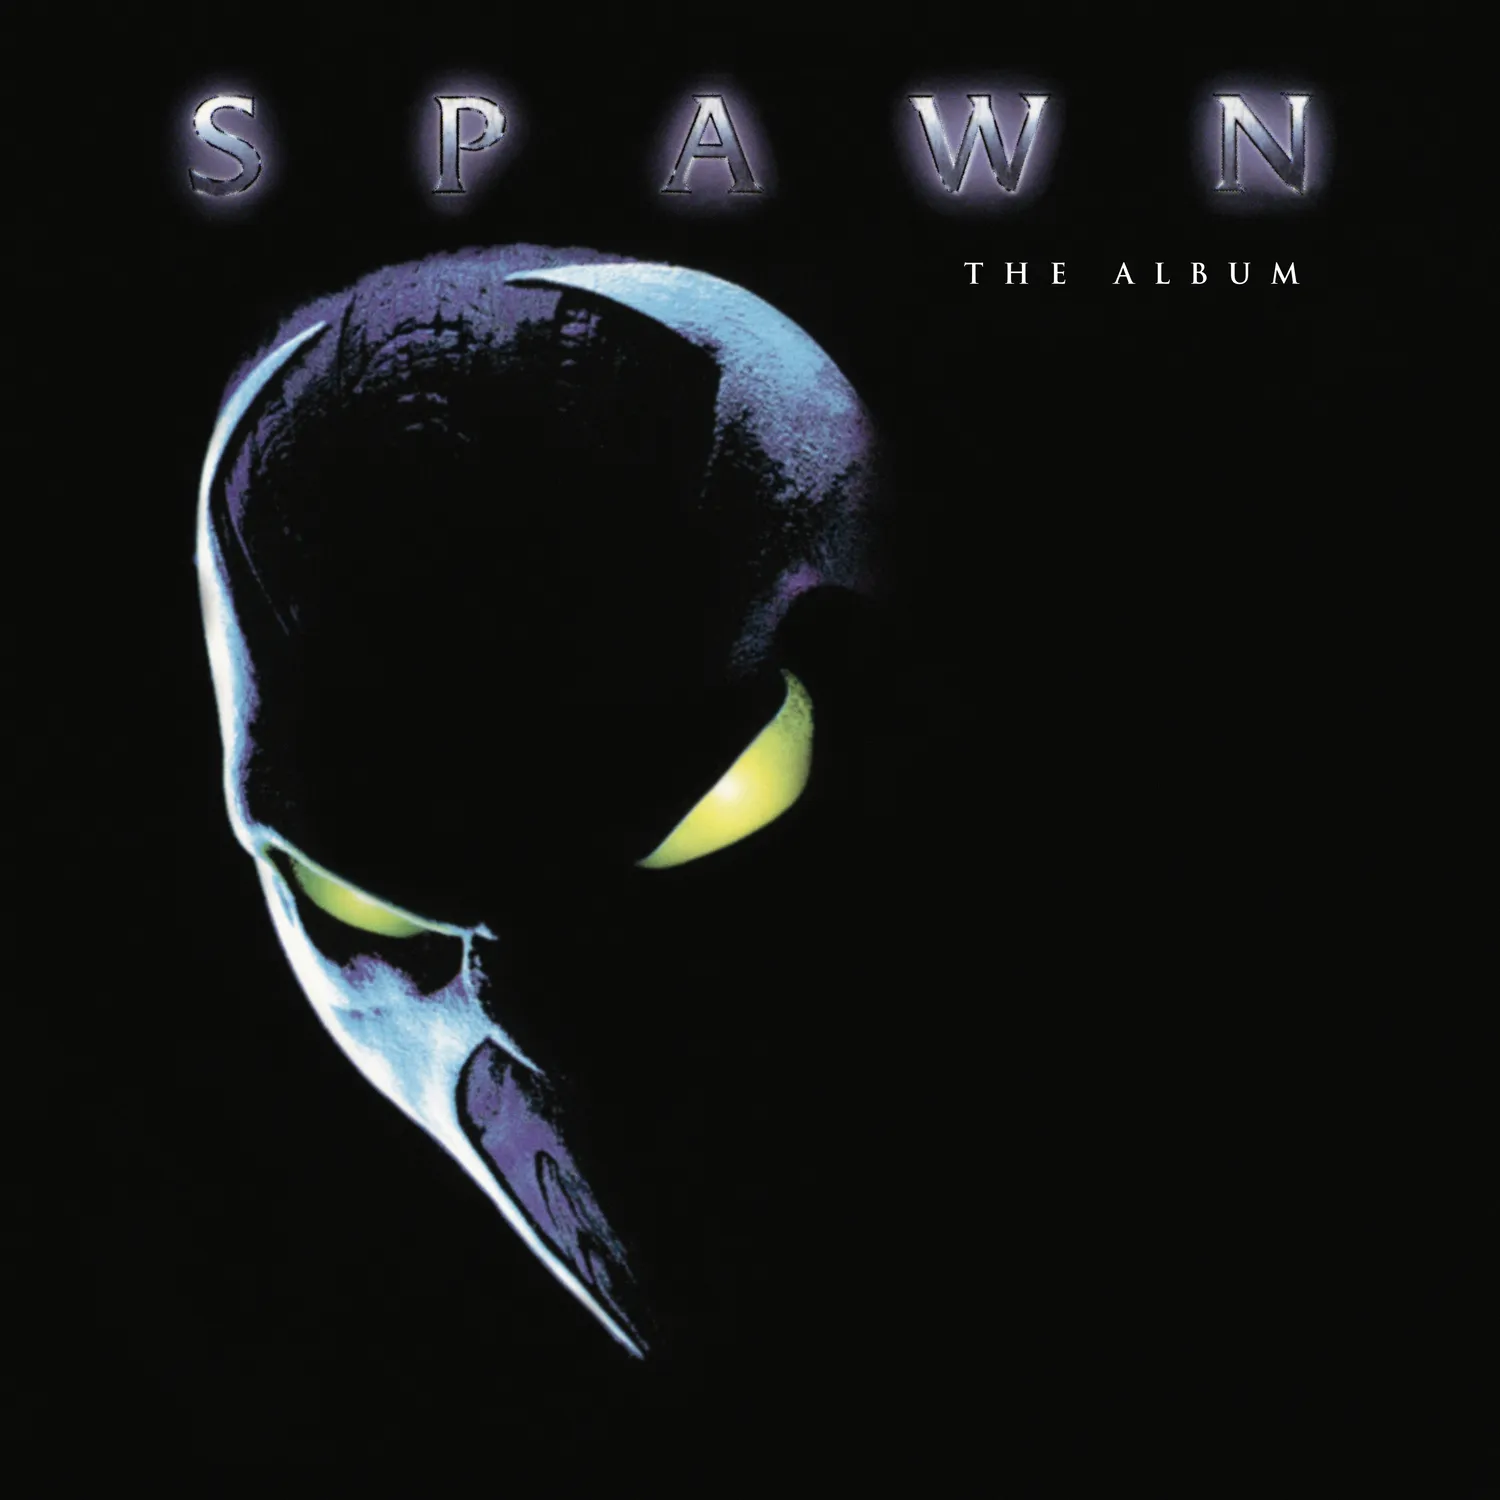 RECORD STORE DAY 2021.6.12 V.A.(METALLICA, KORN) / SPAWN THE ALBUM (12INCH VINYLL FOR RSD)